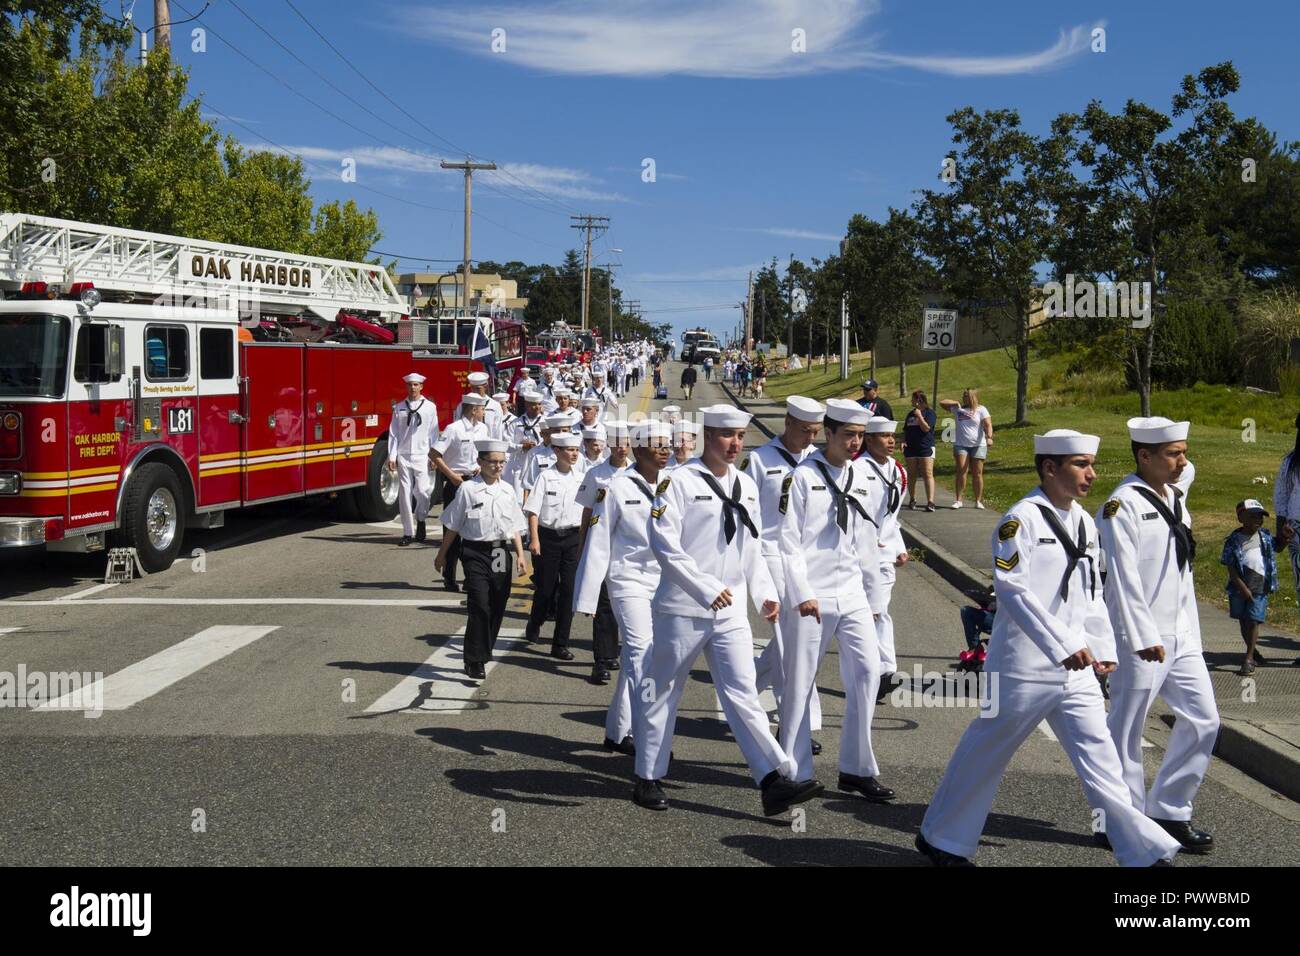 OAK HARBOR, Wash. (July 04, 2017) The United States Naval Sea Cadet Corps prepare to line up for the Oak Harbor Independence Day parade. The Fourth of July parade is held to commemorate the nation's independence with the adoption of the Declaration of Independence 241 years ago on July 4, 1776.  ( Stock Photo